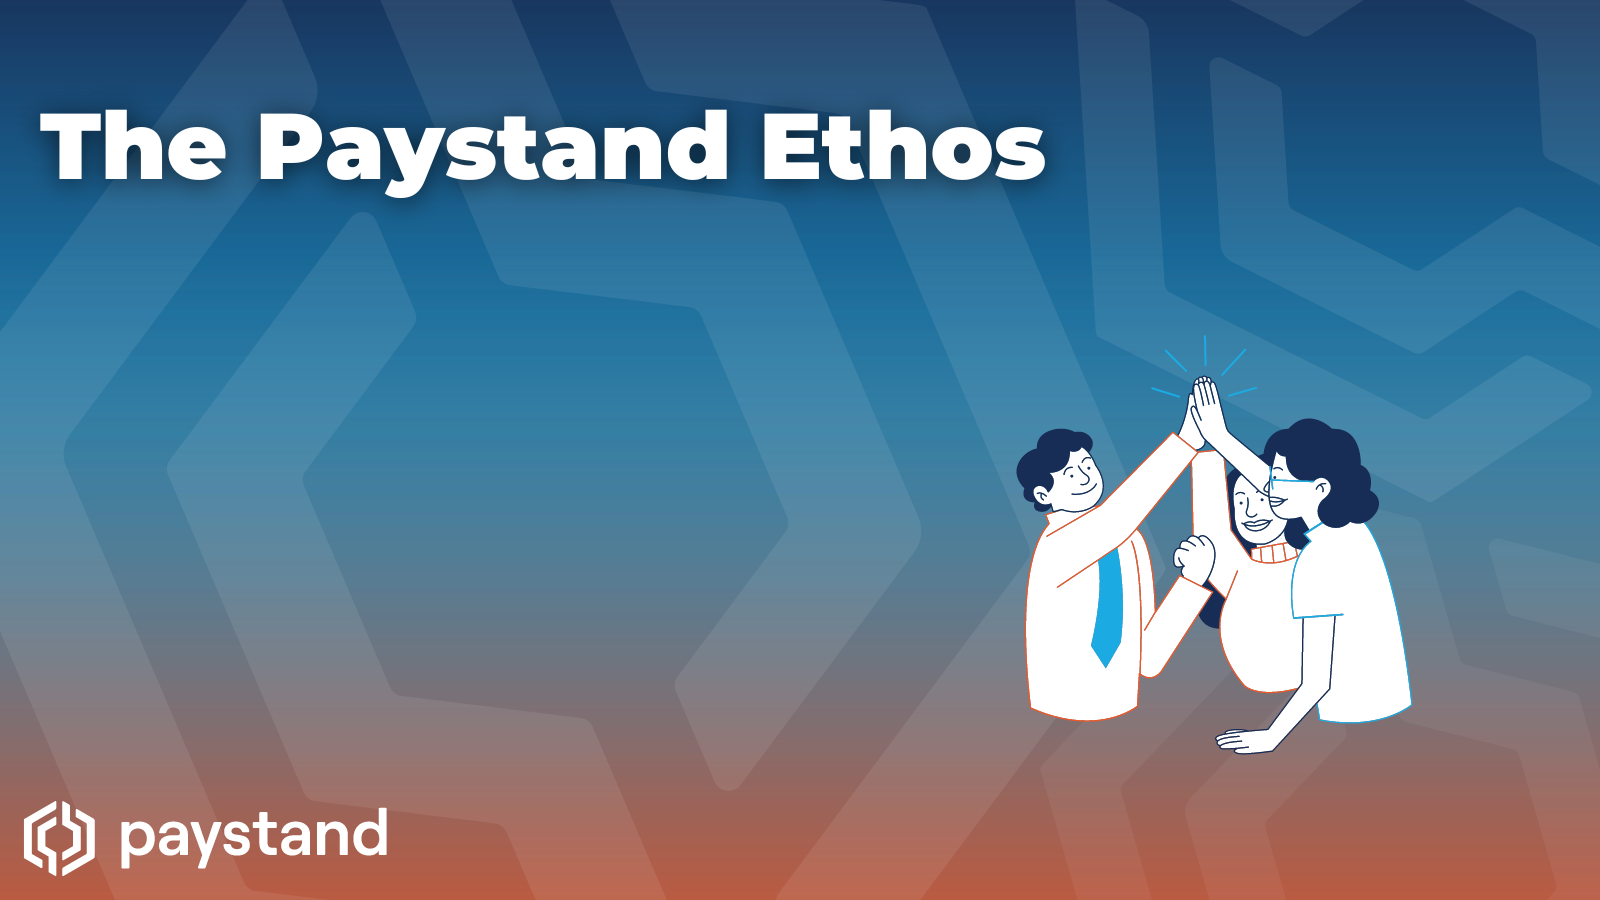 The Paystand Ethos